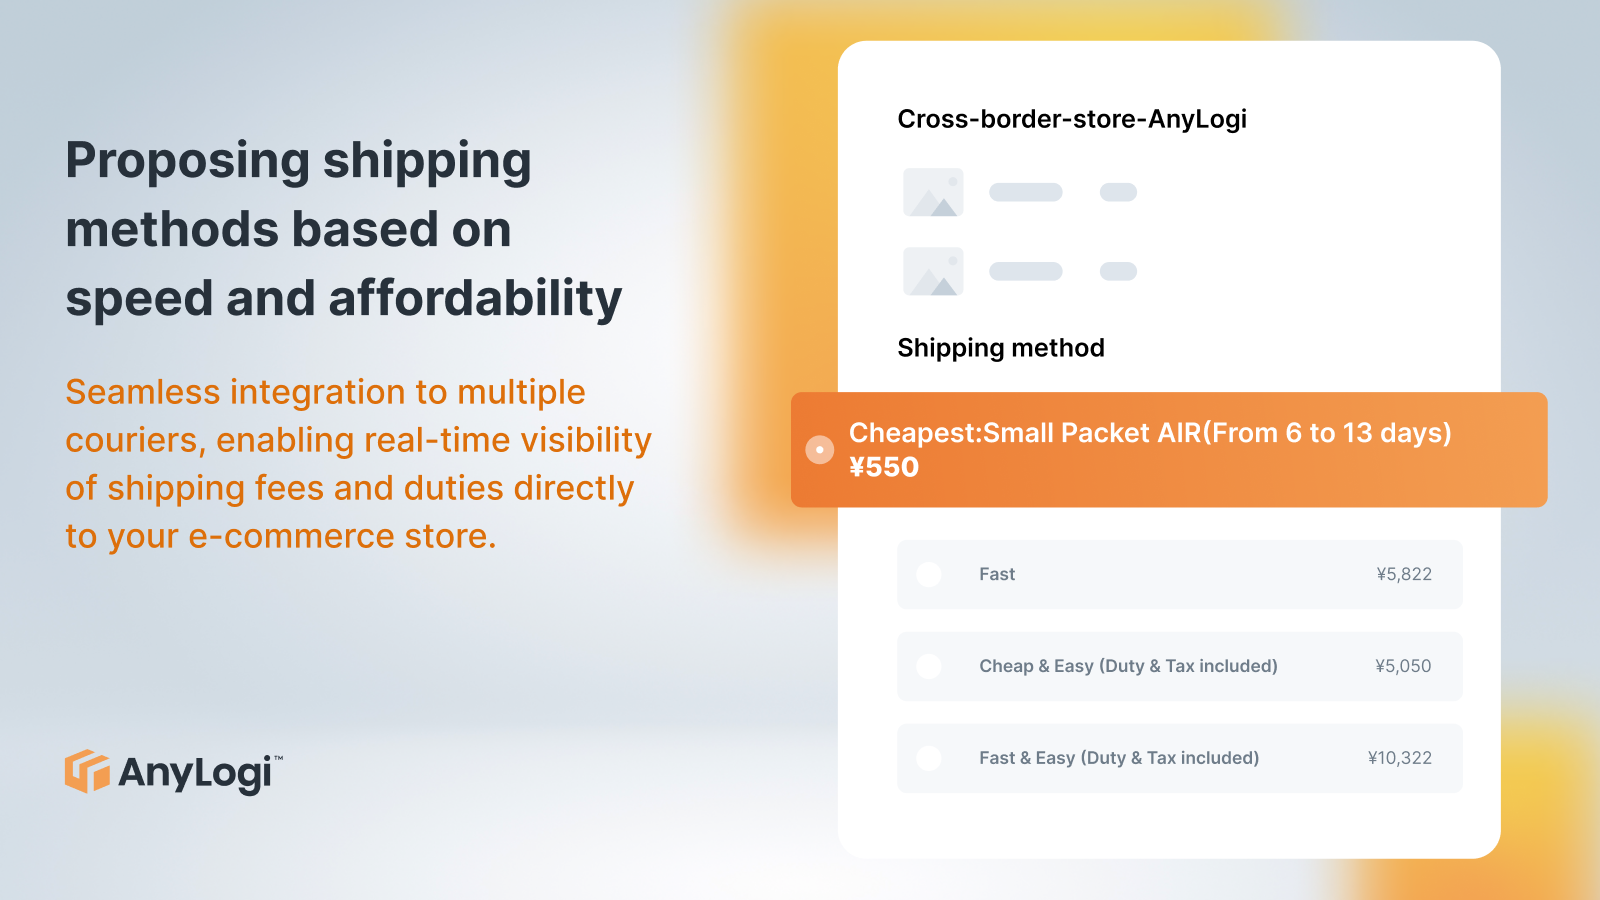 Proposing shipping methods based on speed and affordability